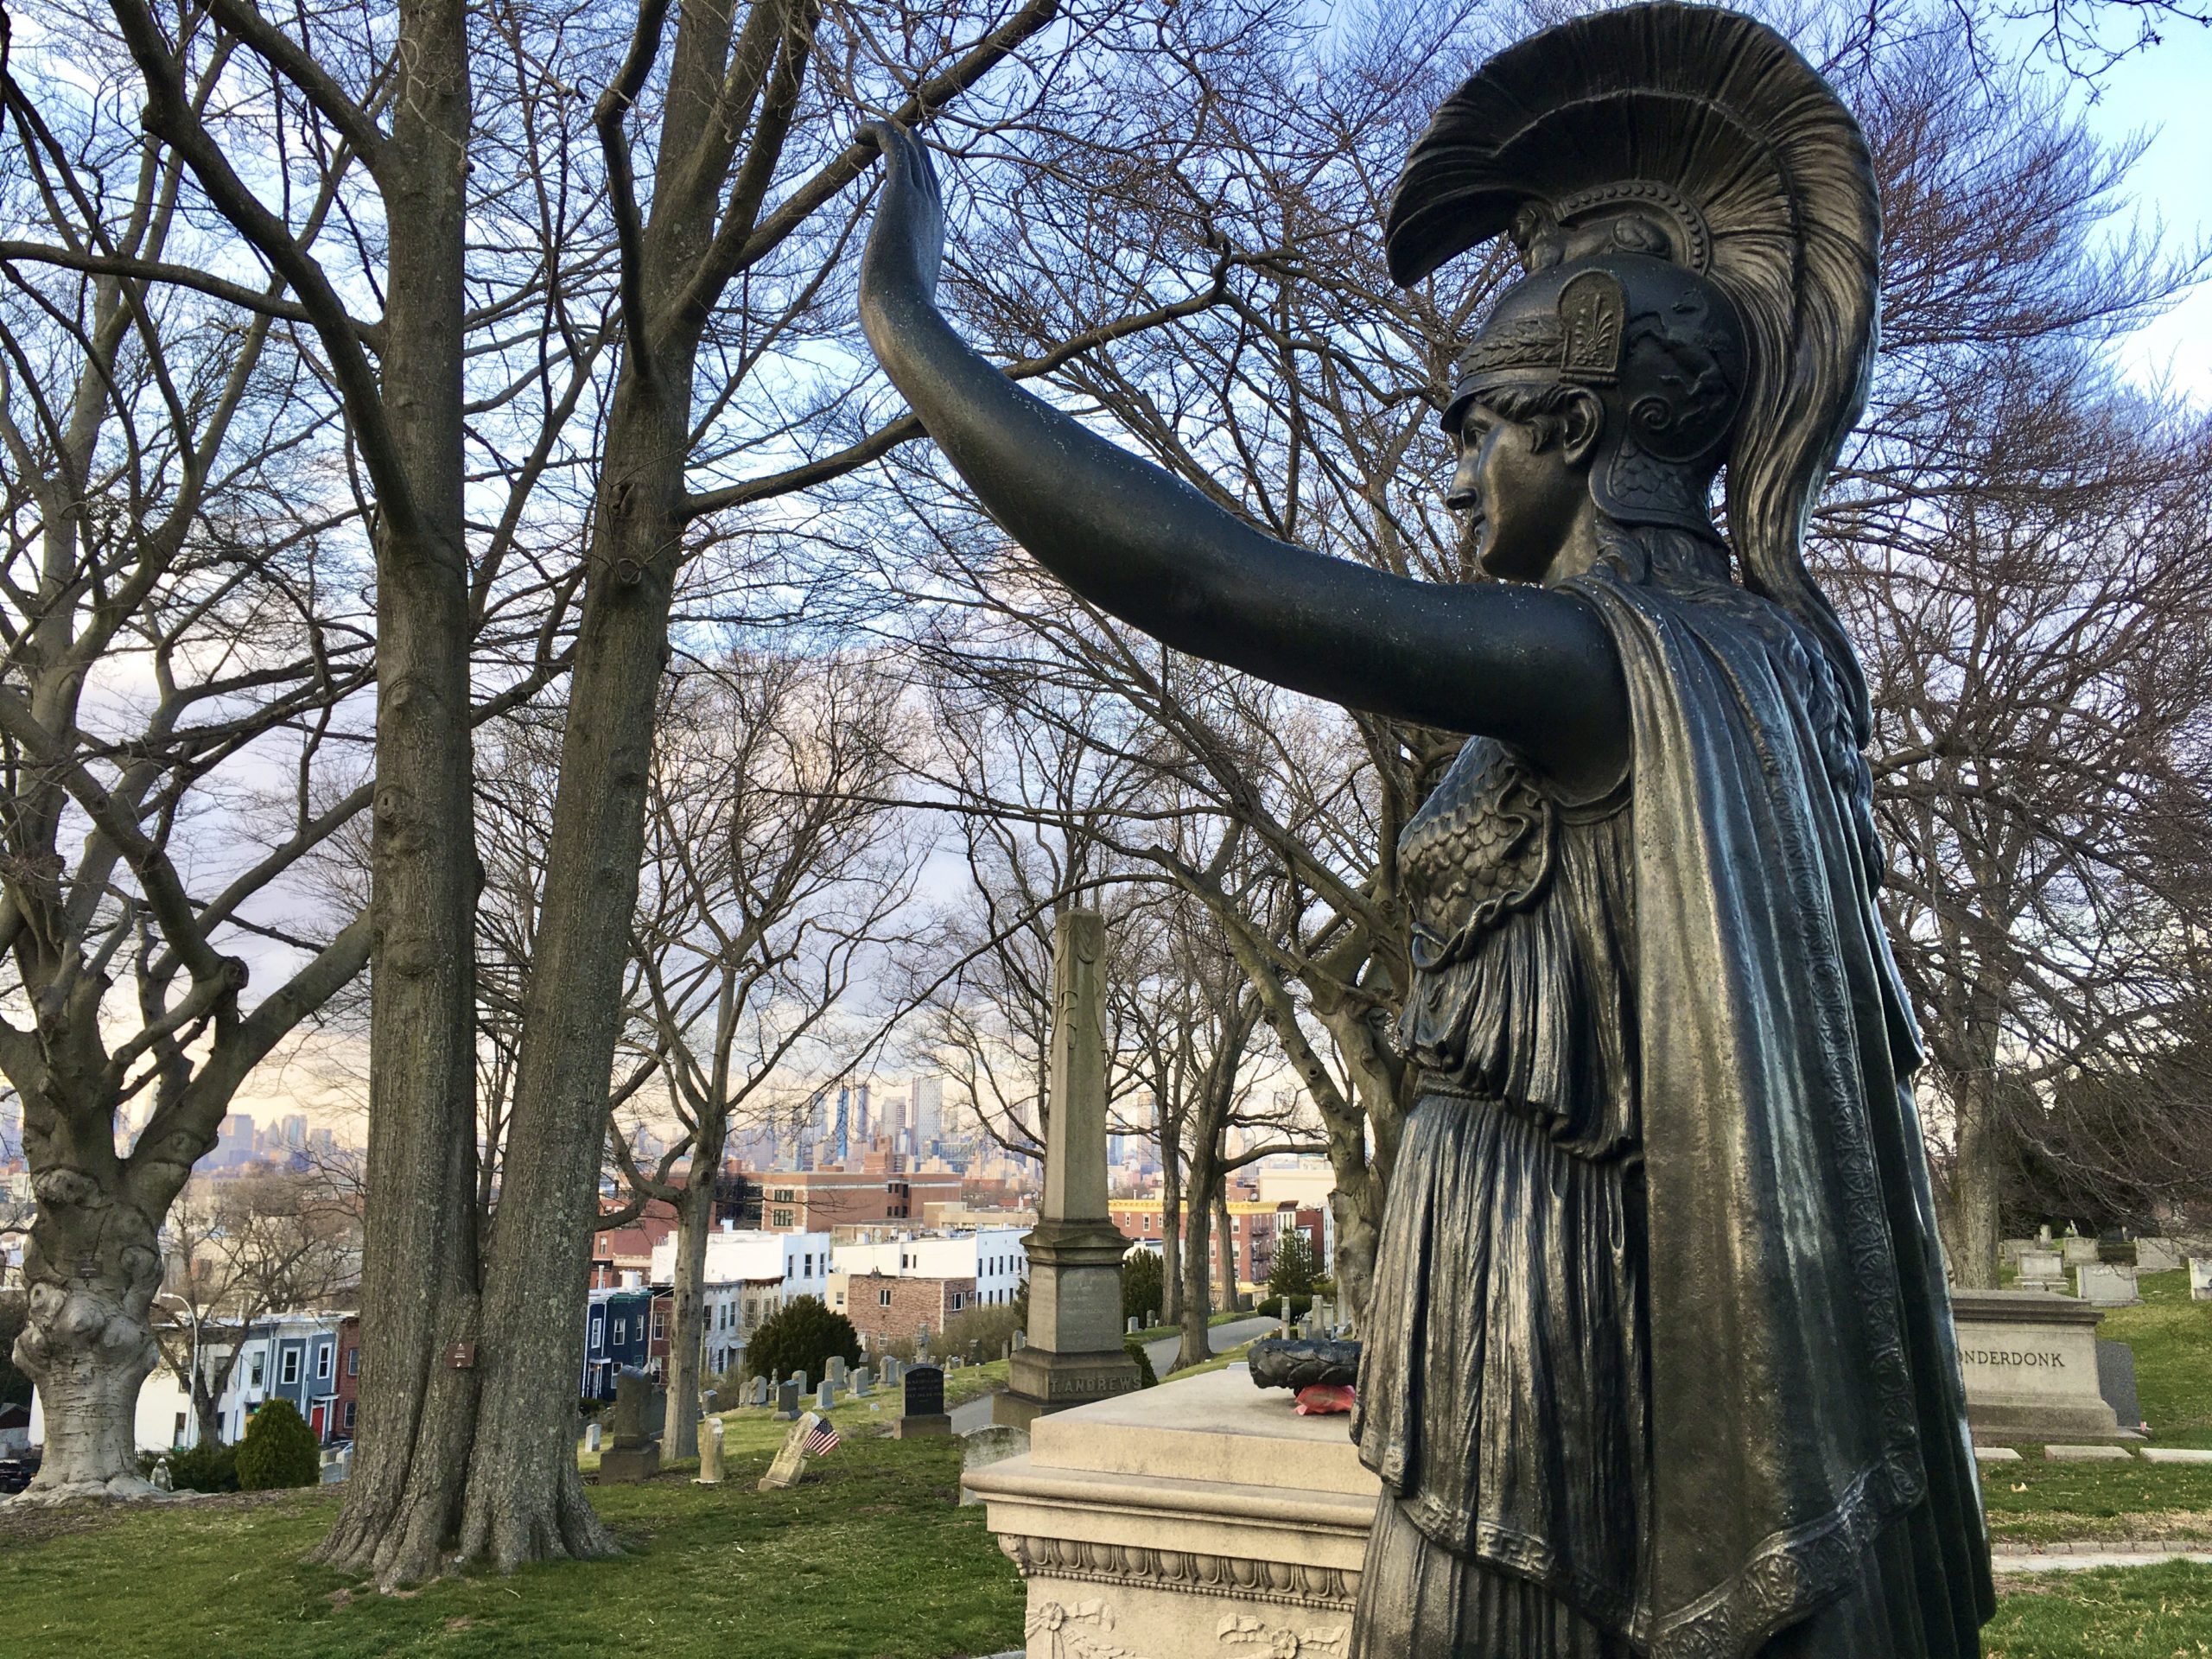 This is Minerva, who stands on Green-Wood’s Battle Hill and raises her hand in salute to the Statue of Liberty. Photo: Lore Croghan/Brooklyn Eagle